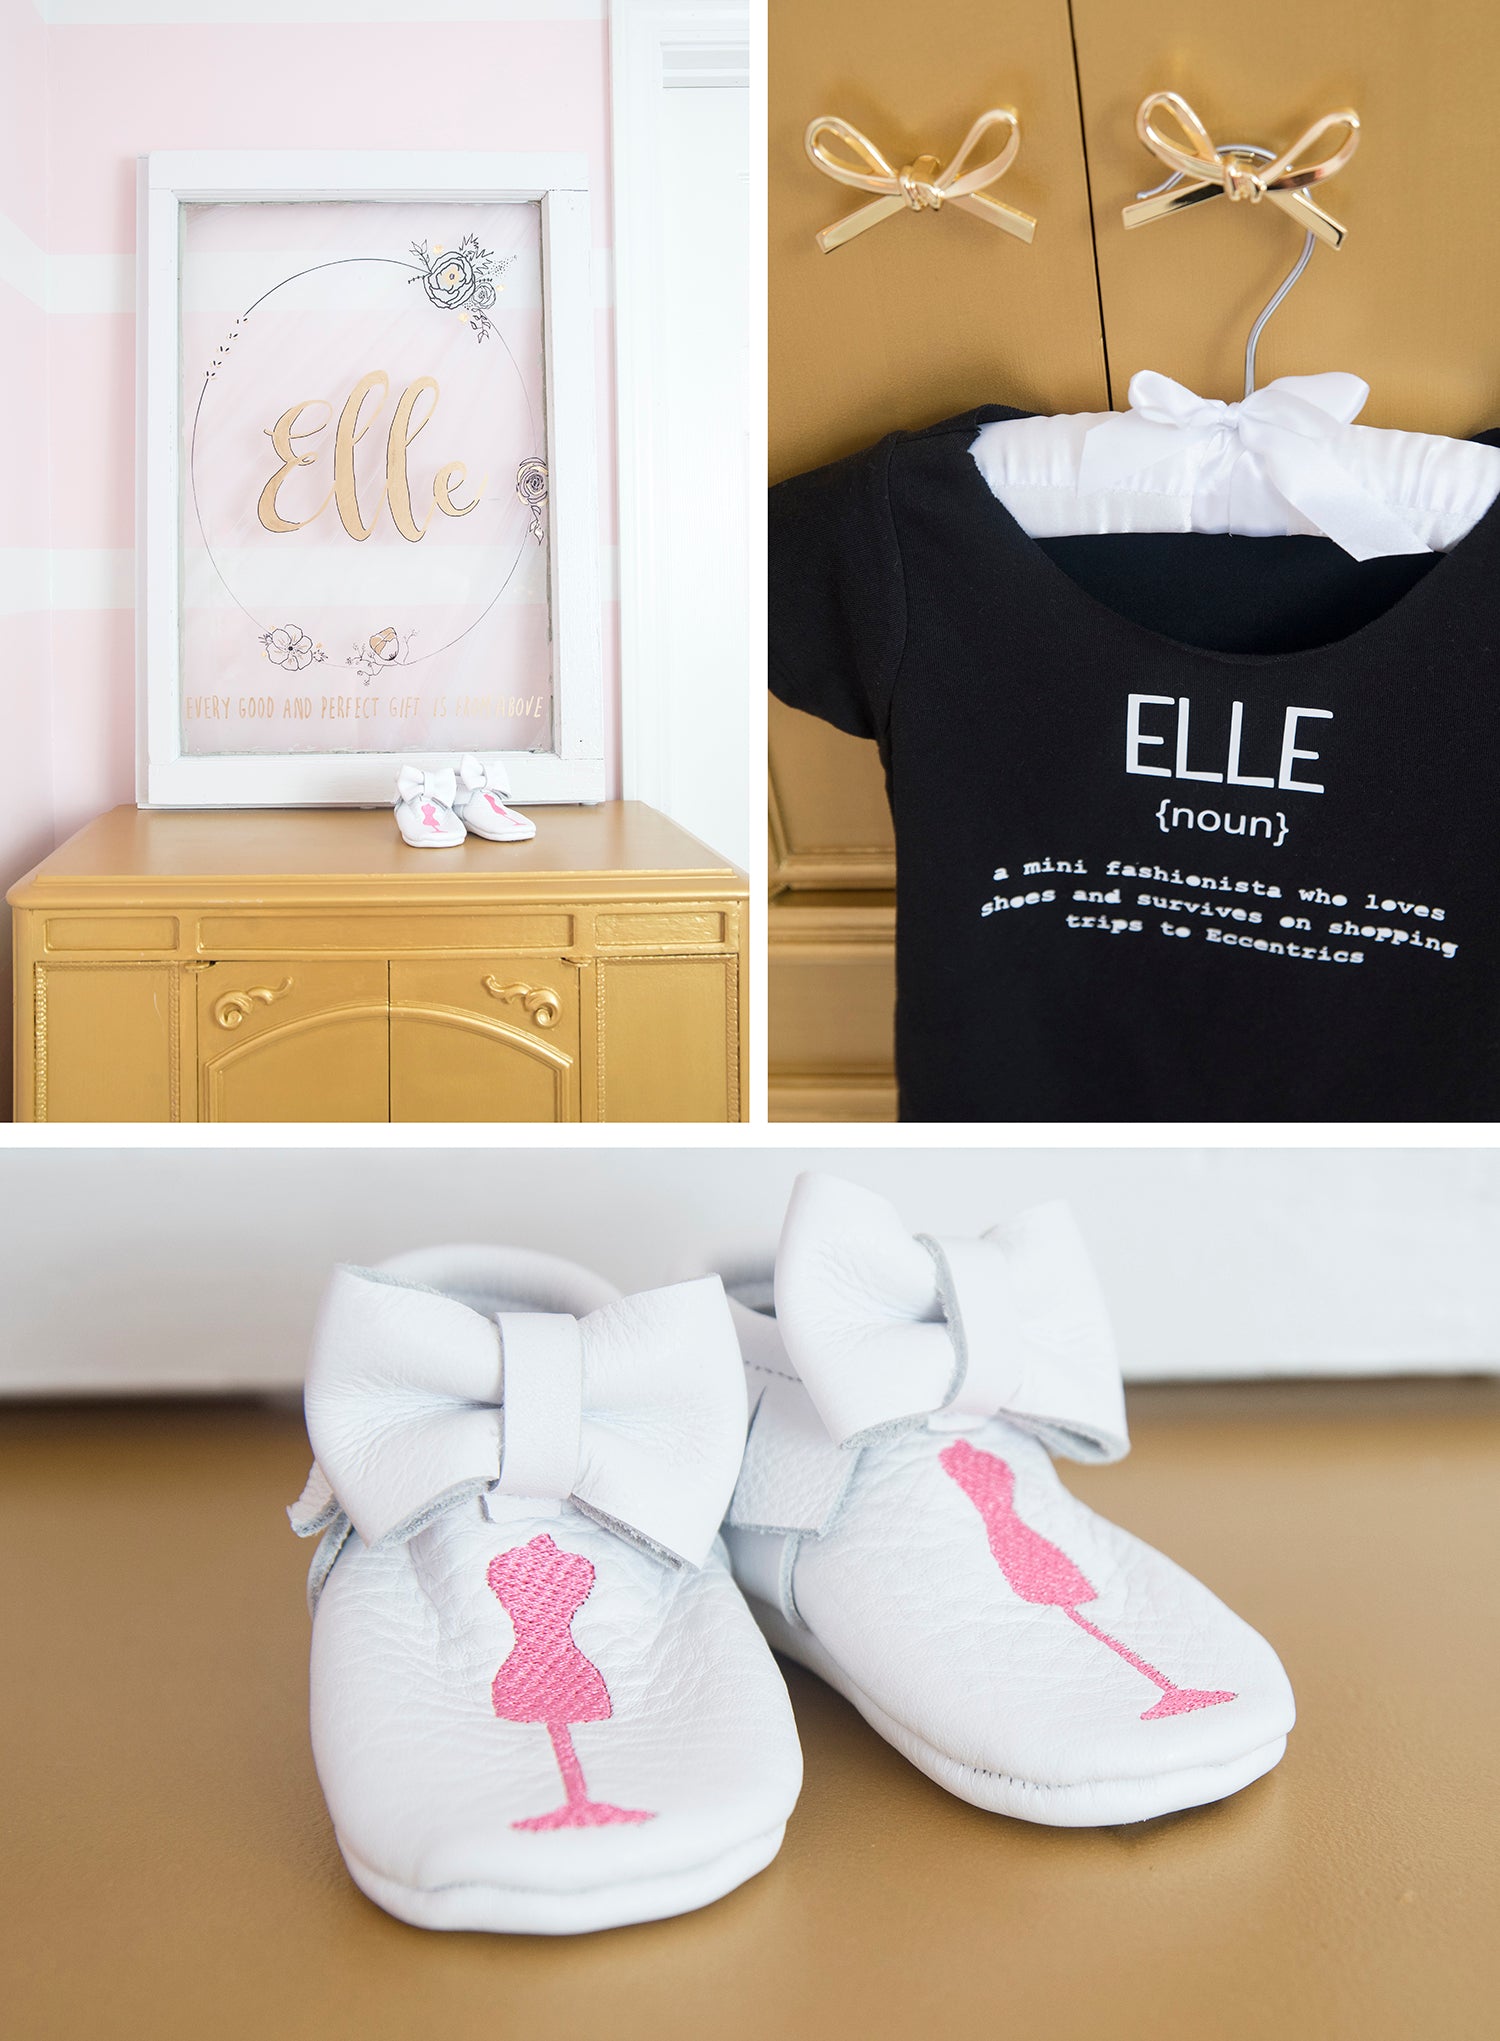 Pretty pink baby girl nursery inspiration by Eccentrics Boutique